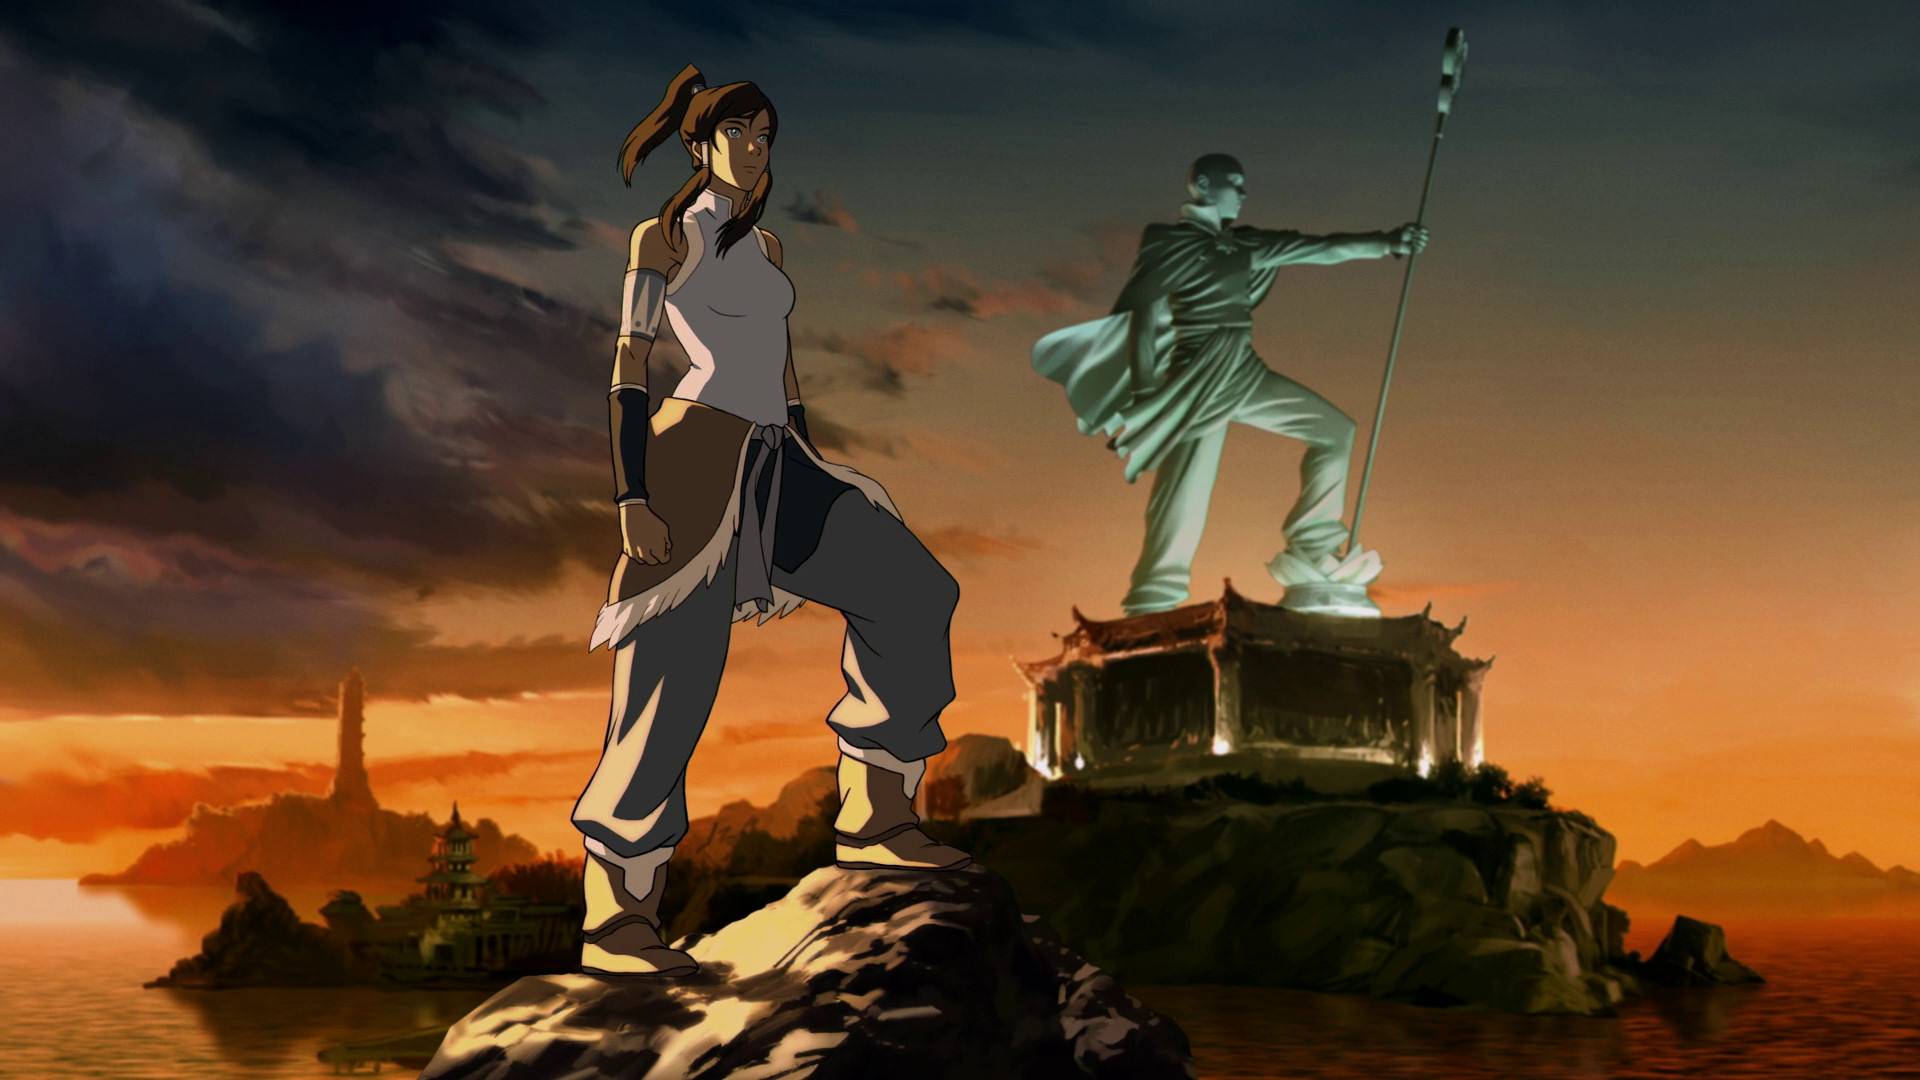 Why “Avatar: The Legend of Korra” Is One Of The Best Animated Series On TV  | FlipGeeks